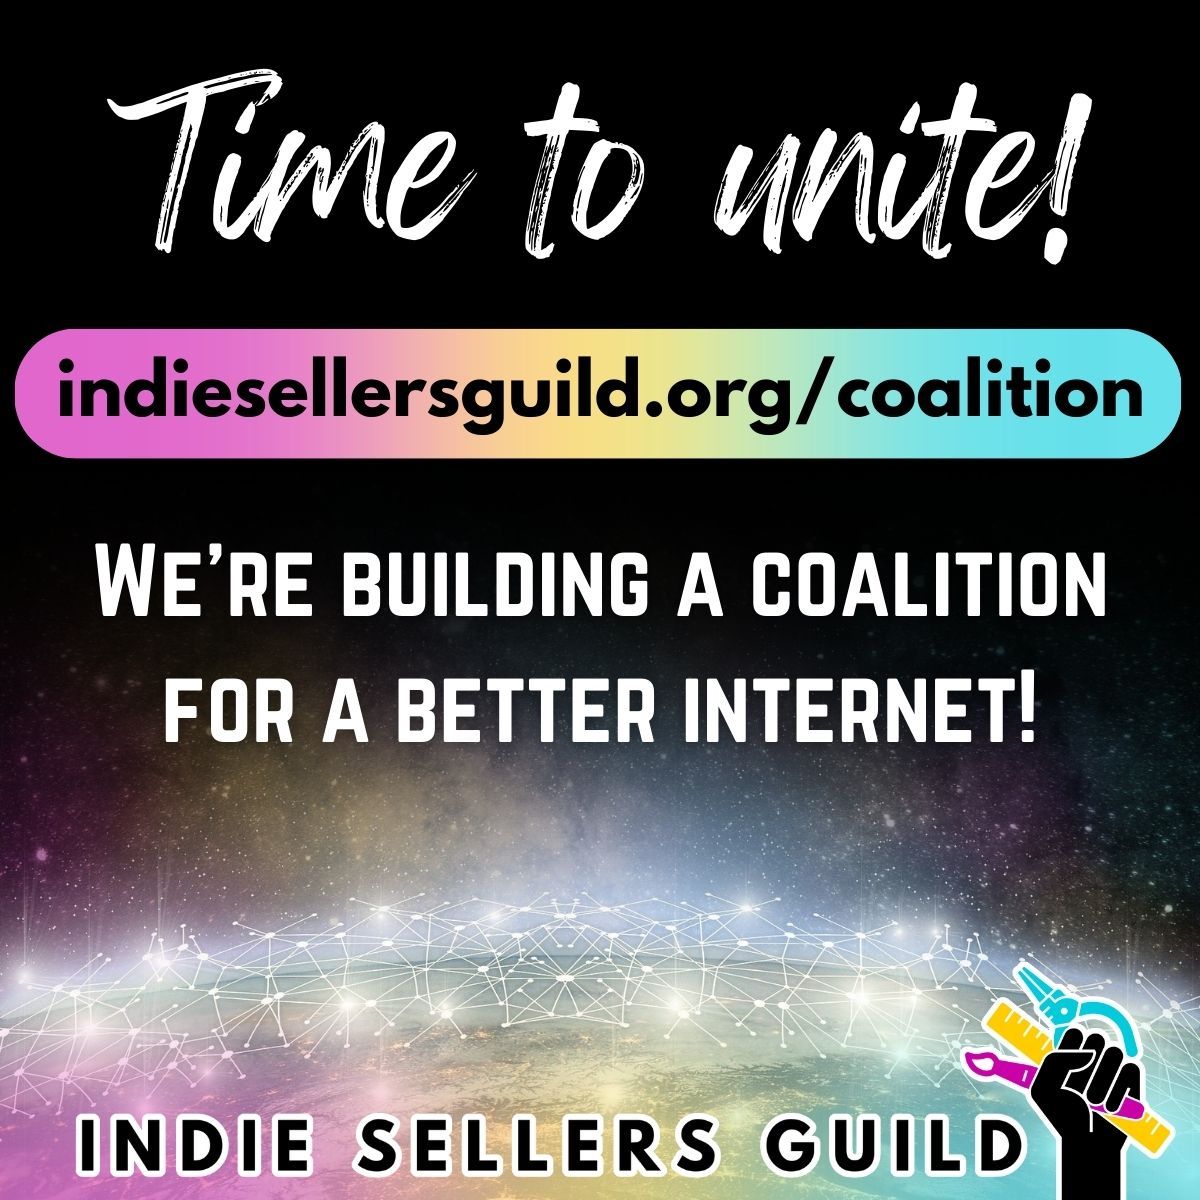 We're building a coalition to take back the power from Big Tech corporations and build an internet that works for everyone! Learn more at buff.ly/43v0O5m #workersoftheworldunite #betterinternet #solidarity #peoplenotplatforms #indiestrong #powertothepeople